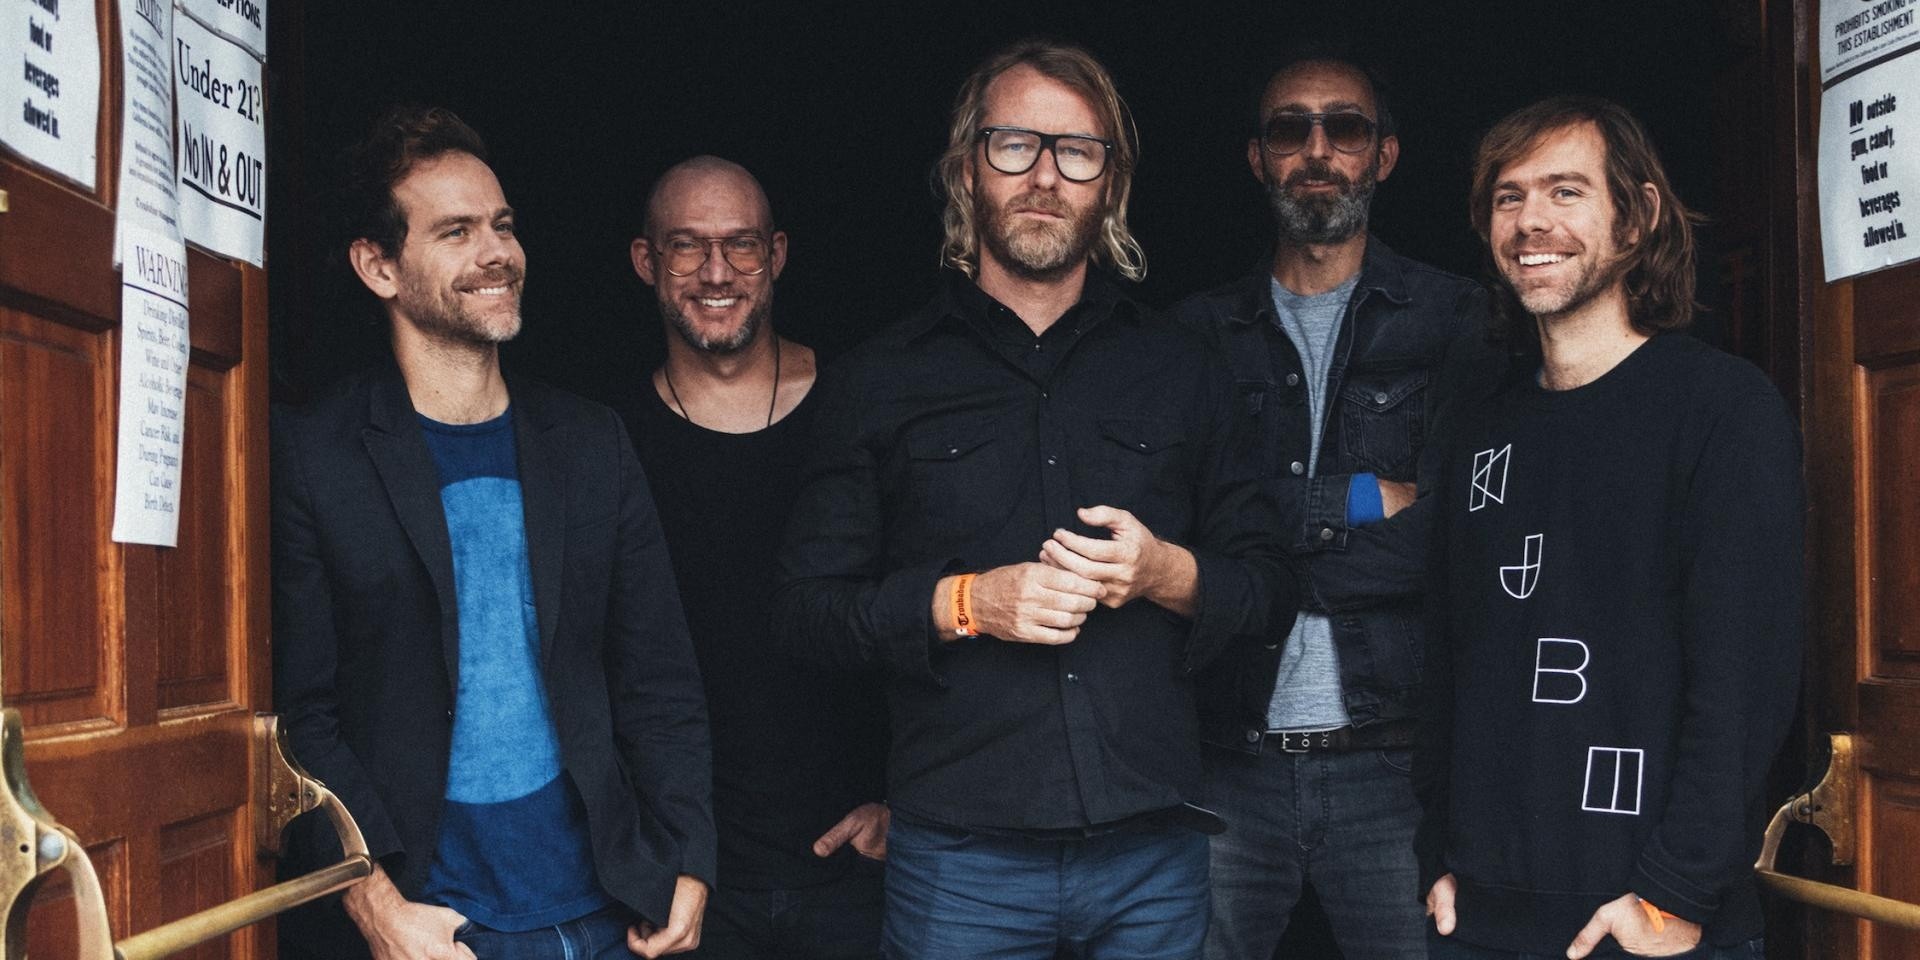 The National shares short film, I Am Easy to Find, featuring music from upcoming album – watch